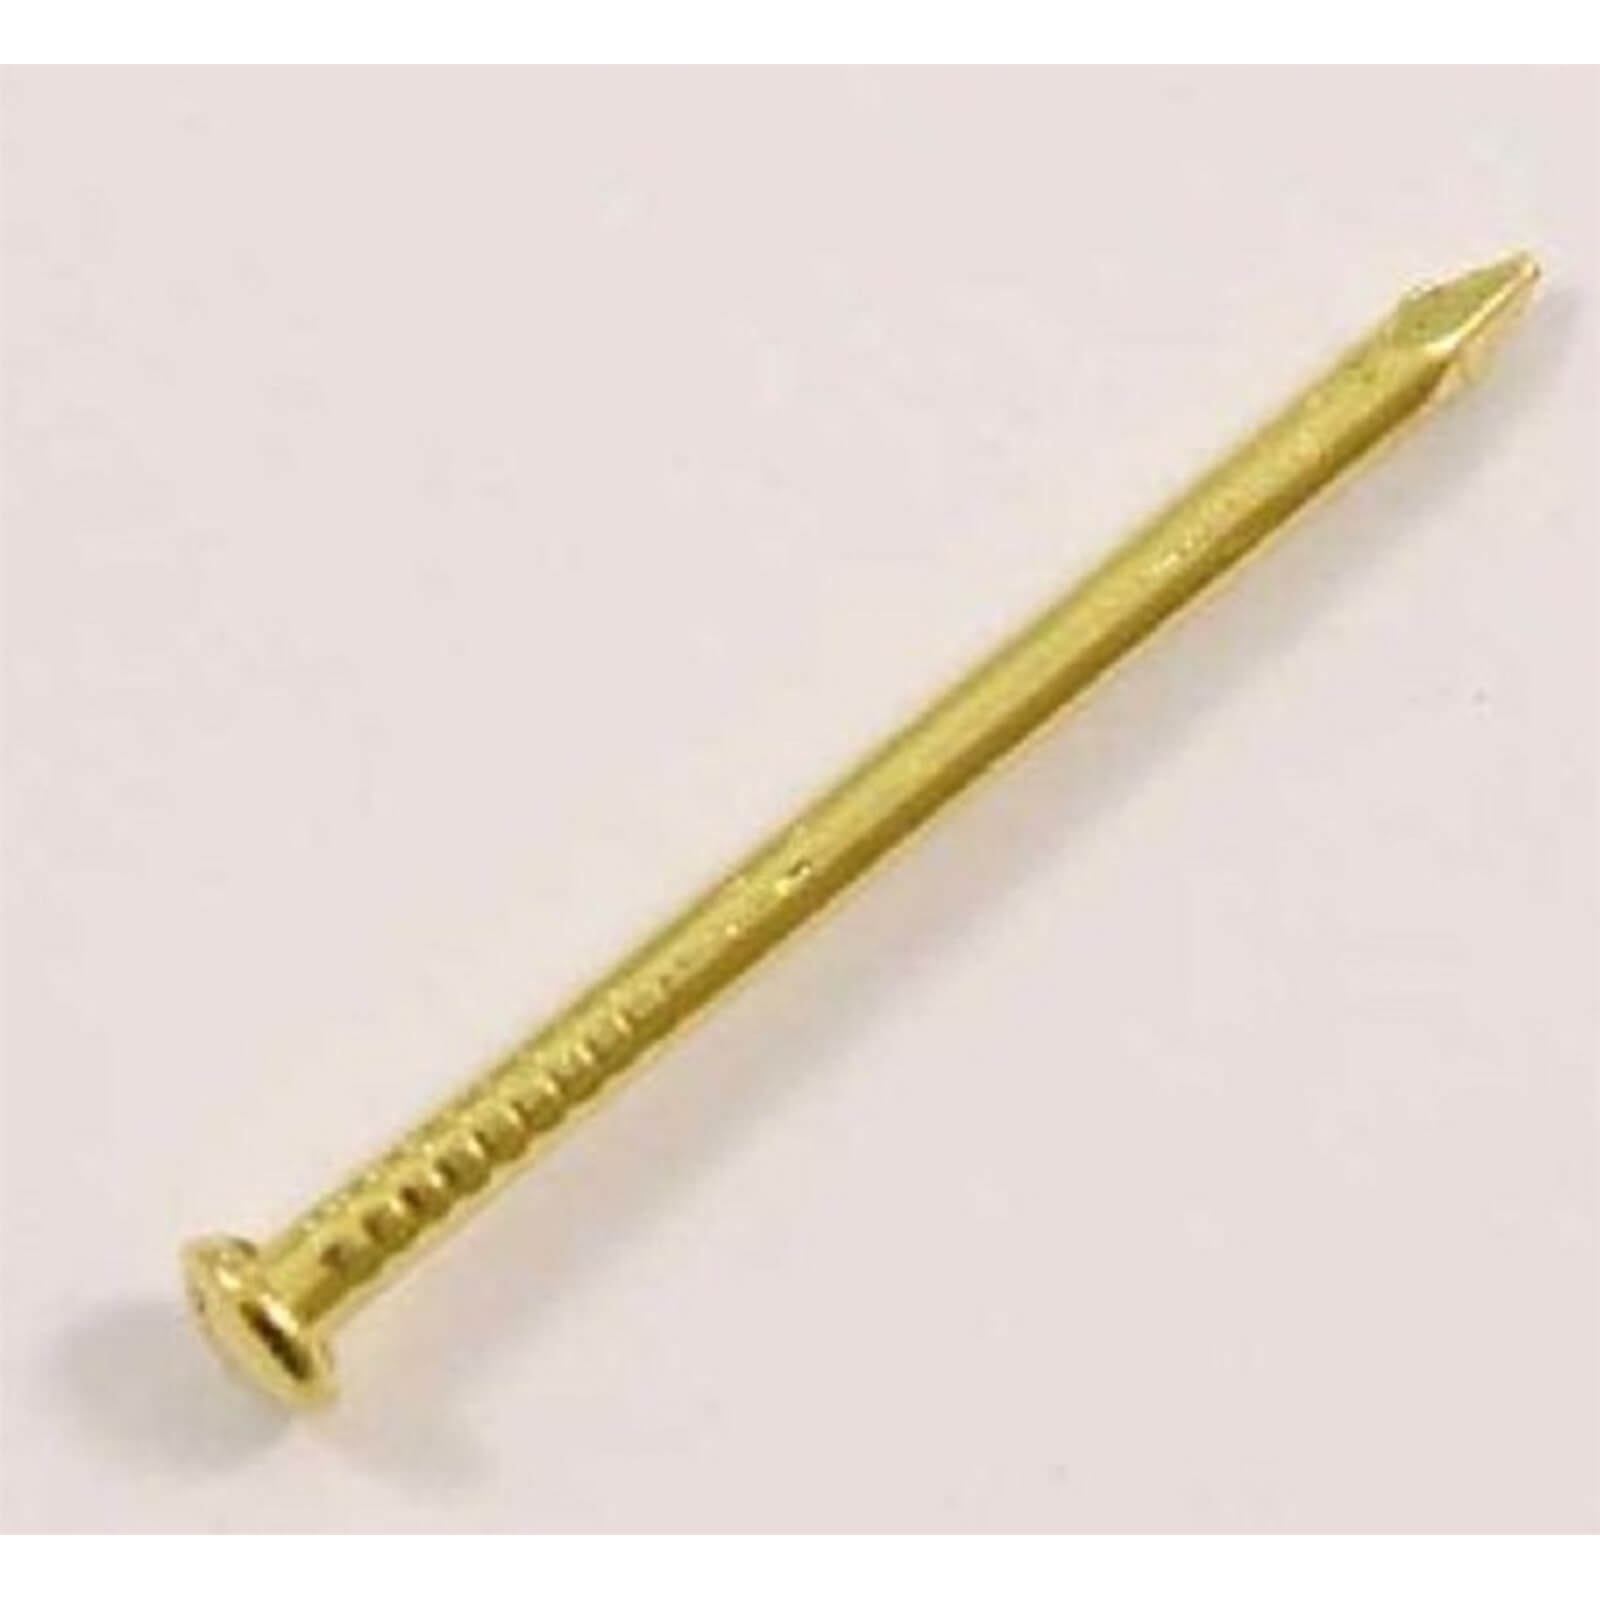 Photo of Picture Pins - Brass Head - 20 Pack